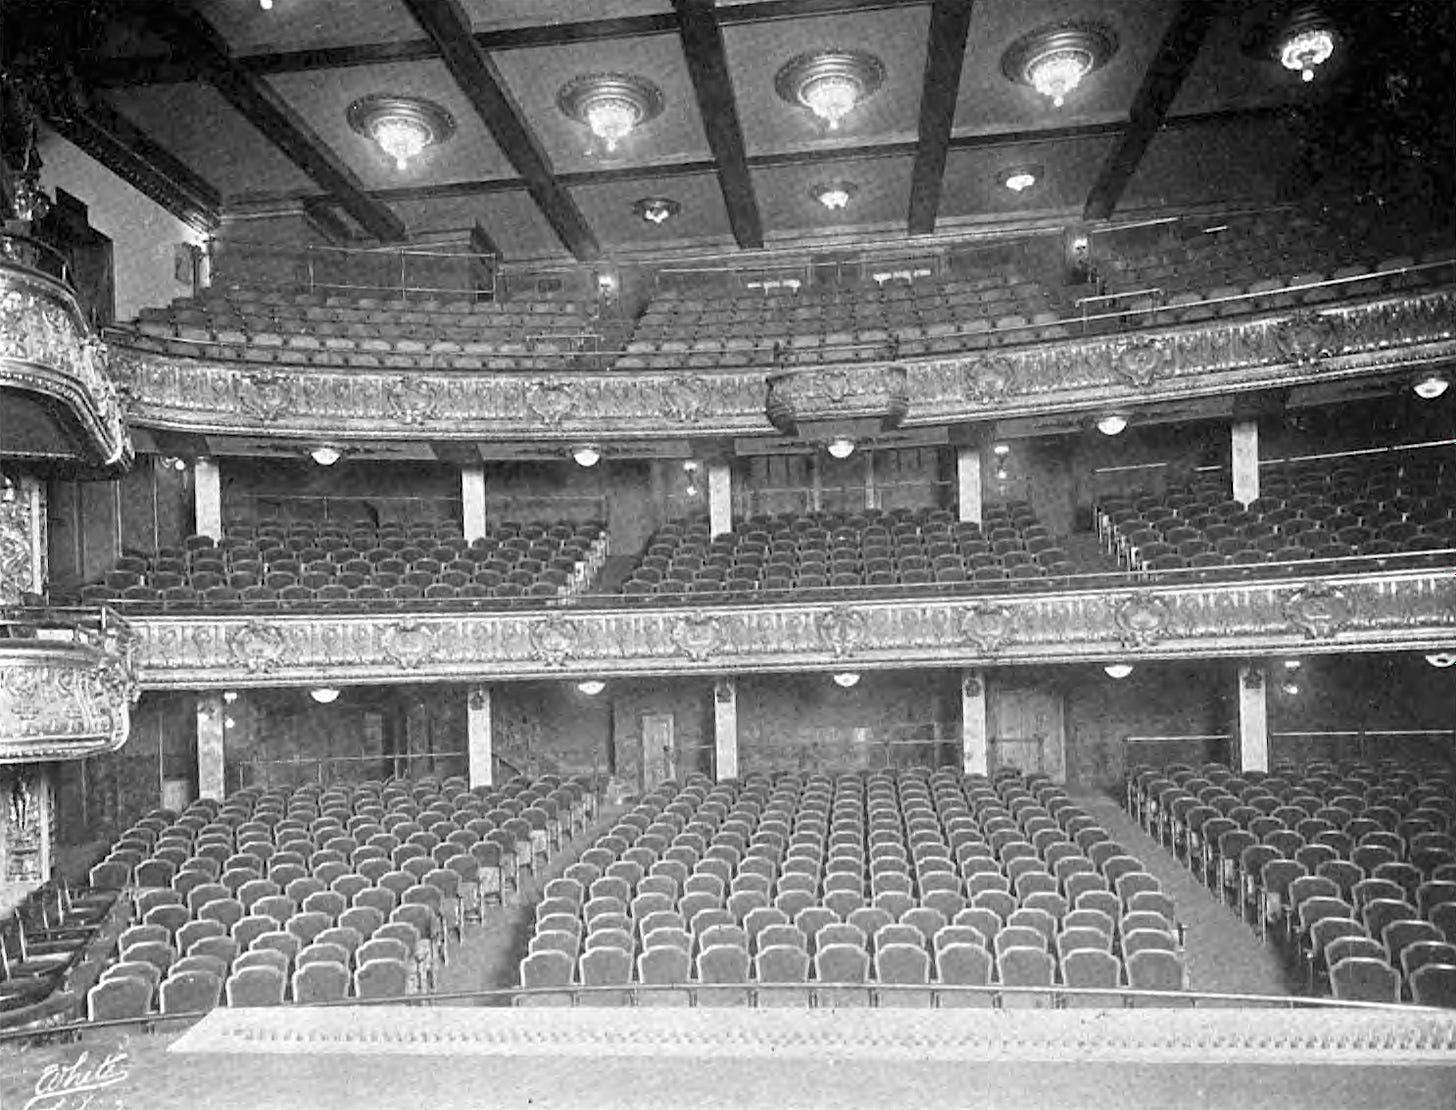 George M. Cohan’s Theater, demolished in 1938